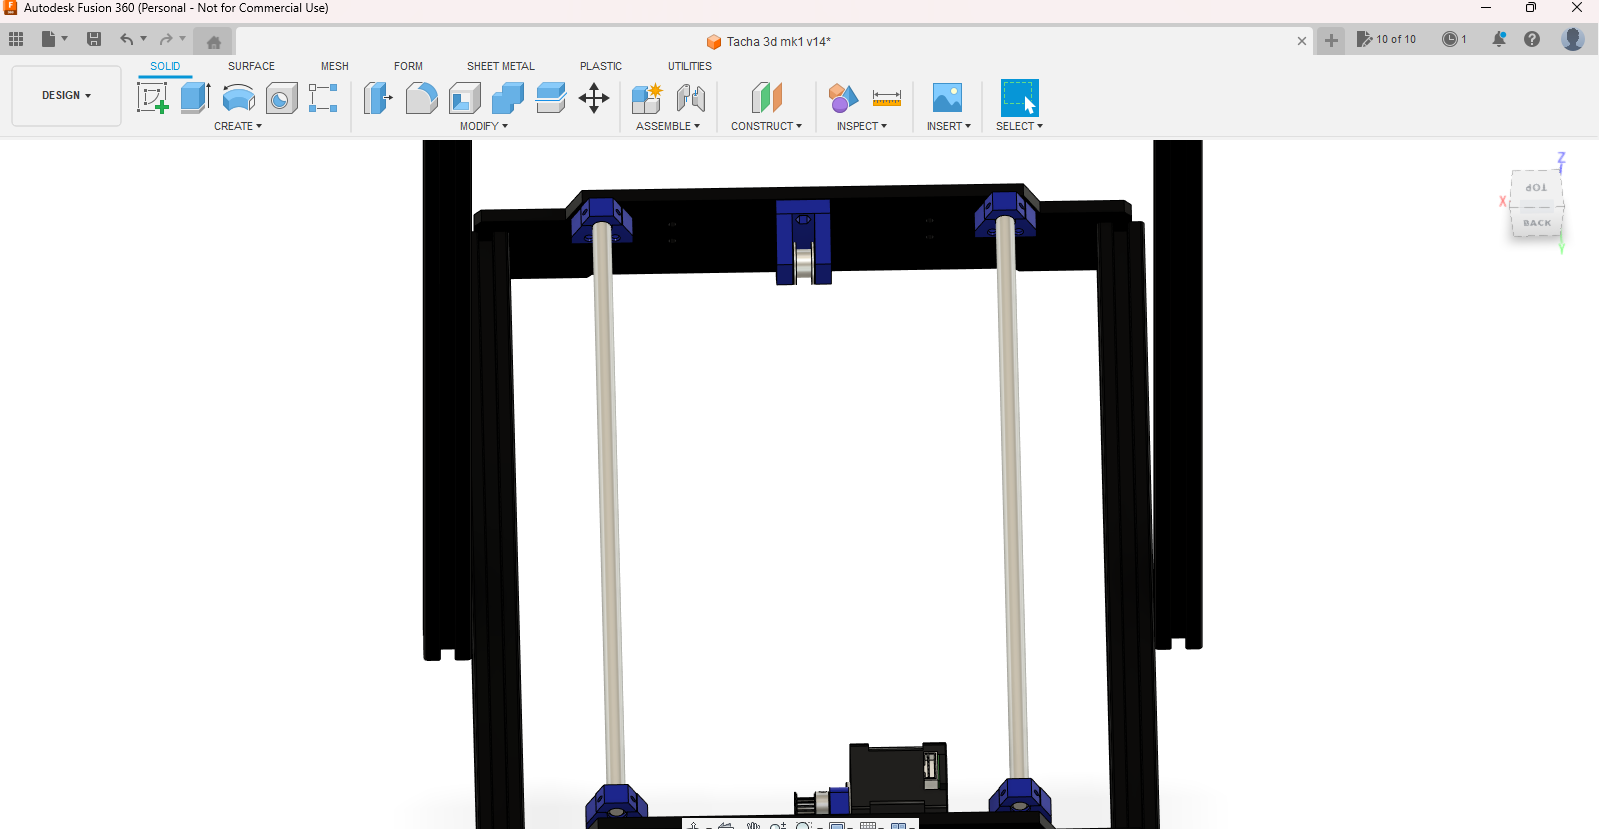 Autodesk Fusion 360 (Personal - Not for Commercial Use) 6_30_2023 9_24_59 PM.png